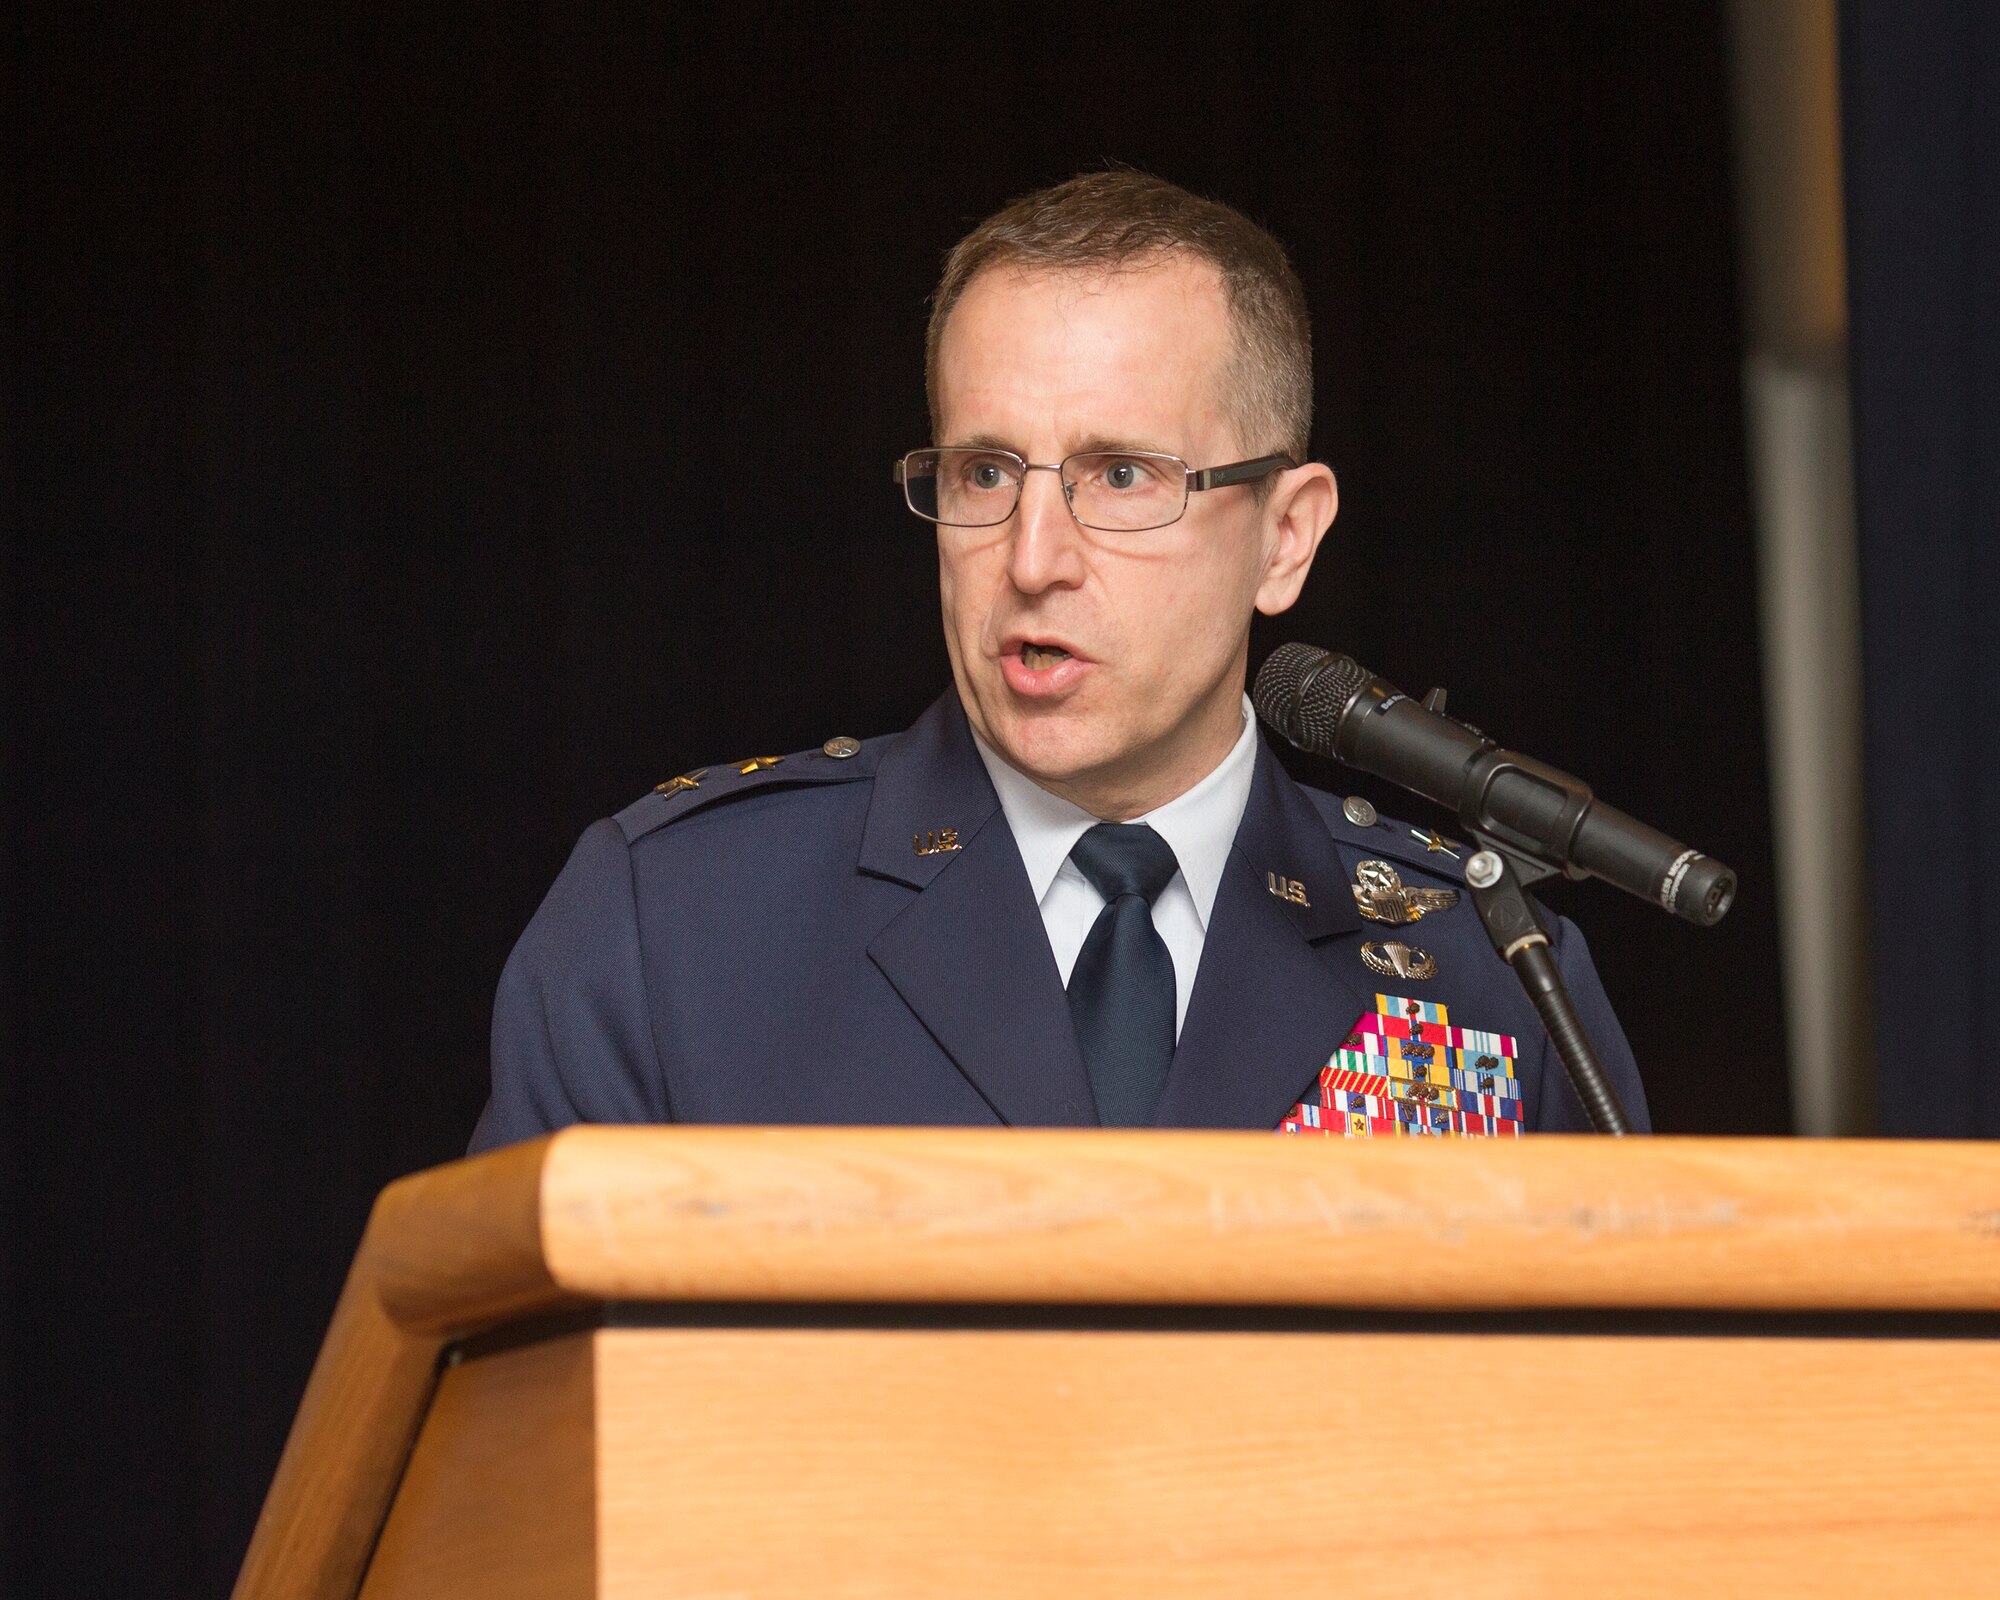 U.S. Air Force Maj. Gen. James Slife, deputy chief of staff for United Nations Command and U.S. Forces Korea at Yongsan Garrison, Seoul, South Korea, gives a speech during the United Nations Command (Rear) change of command ceremony at Yokota Air Base, Japan, Jan. 26, 2016. As the United Nations Command’s principal representative in Japan, the UNC-R maintains the status of forces agreement regarding United Nations Forces in Japan during armistice conditions. (U.S. Air Force photo by Osakabe Yasuo/Released) 